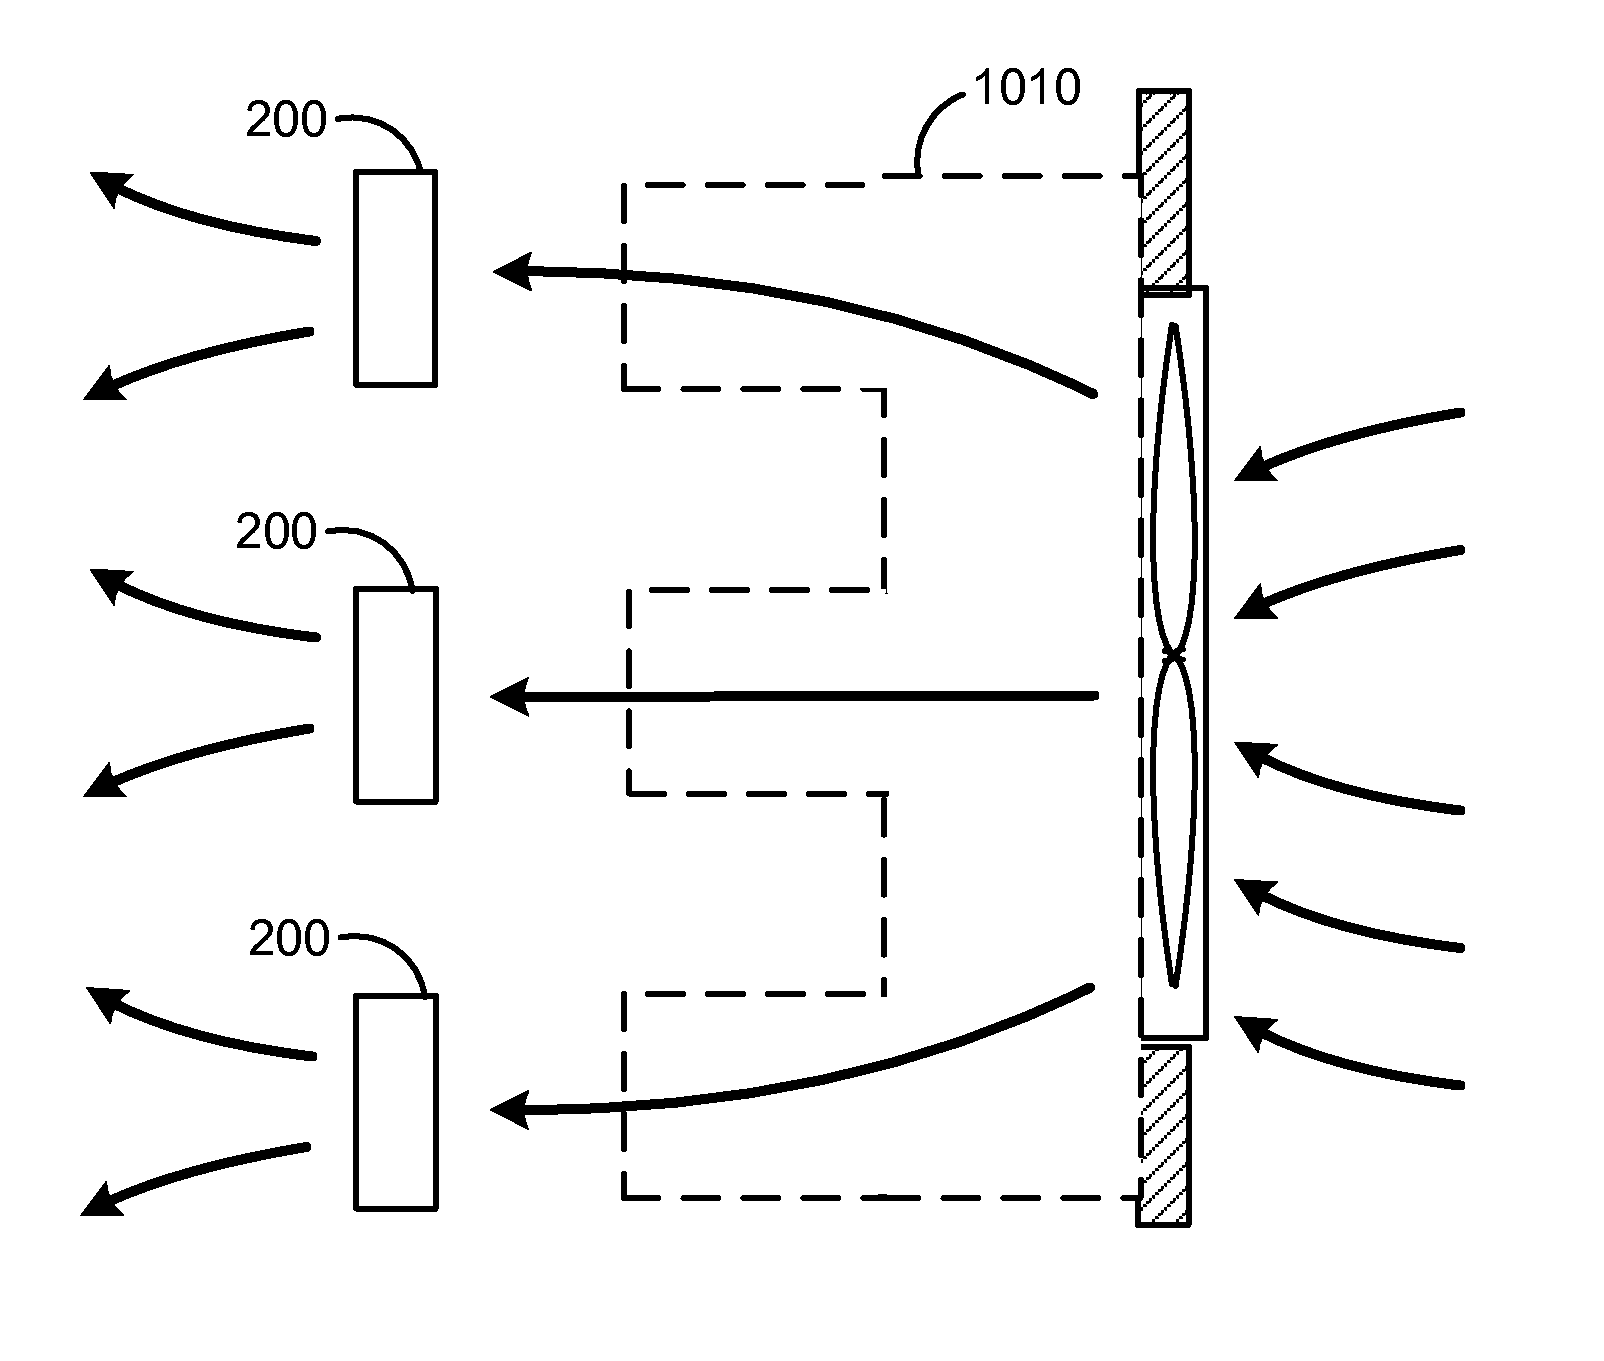 System and methods for wind energy recapture from a non natural wind source